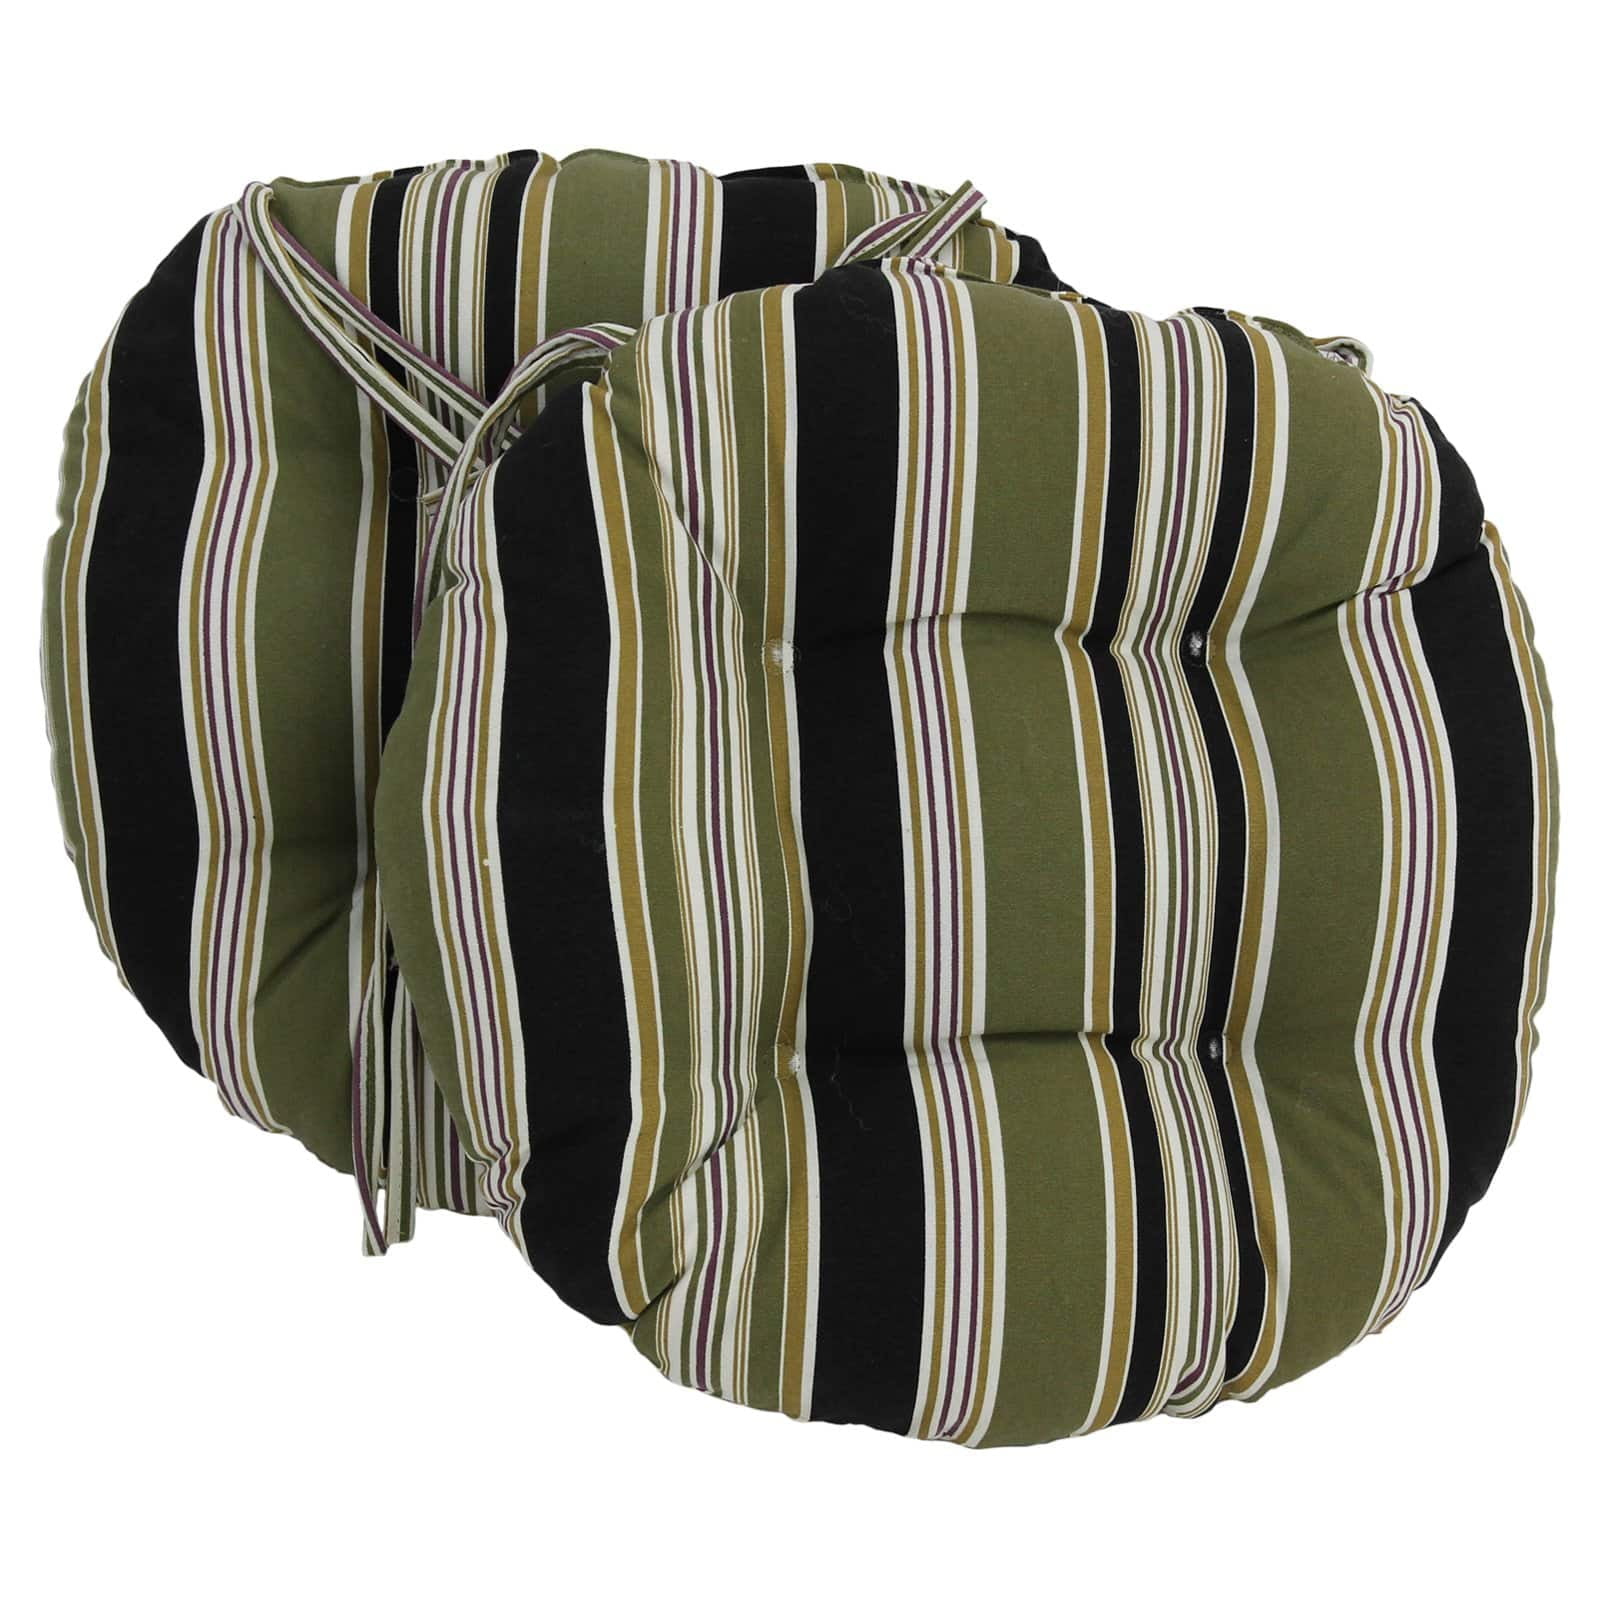 Picture of Blazing Needles 916X16RD-T-2CH-REO-41 16 in. Spun Polyester Patterned Outdoor Round Tufted Chair Cushions, Farrington Terrace Grenadine - Set of 2